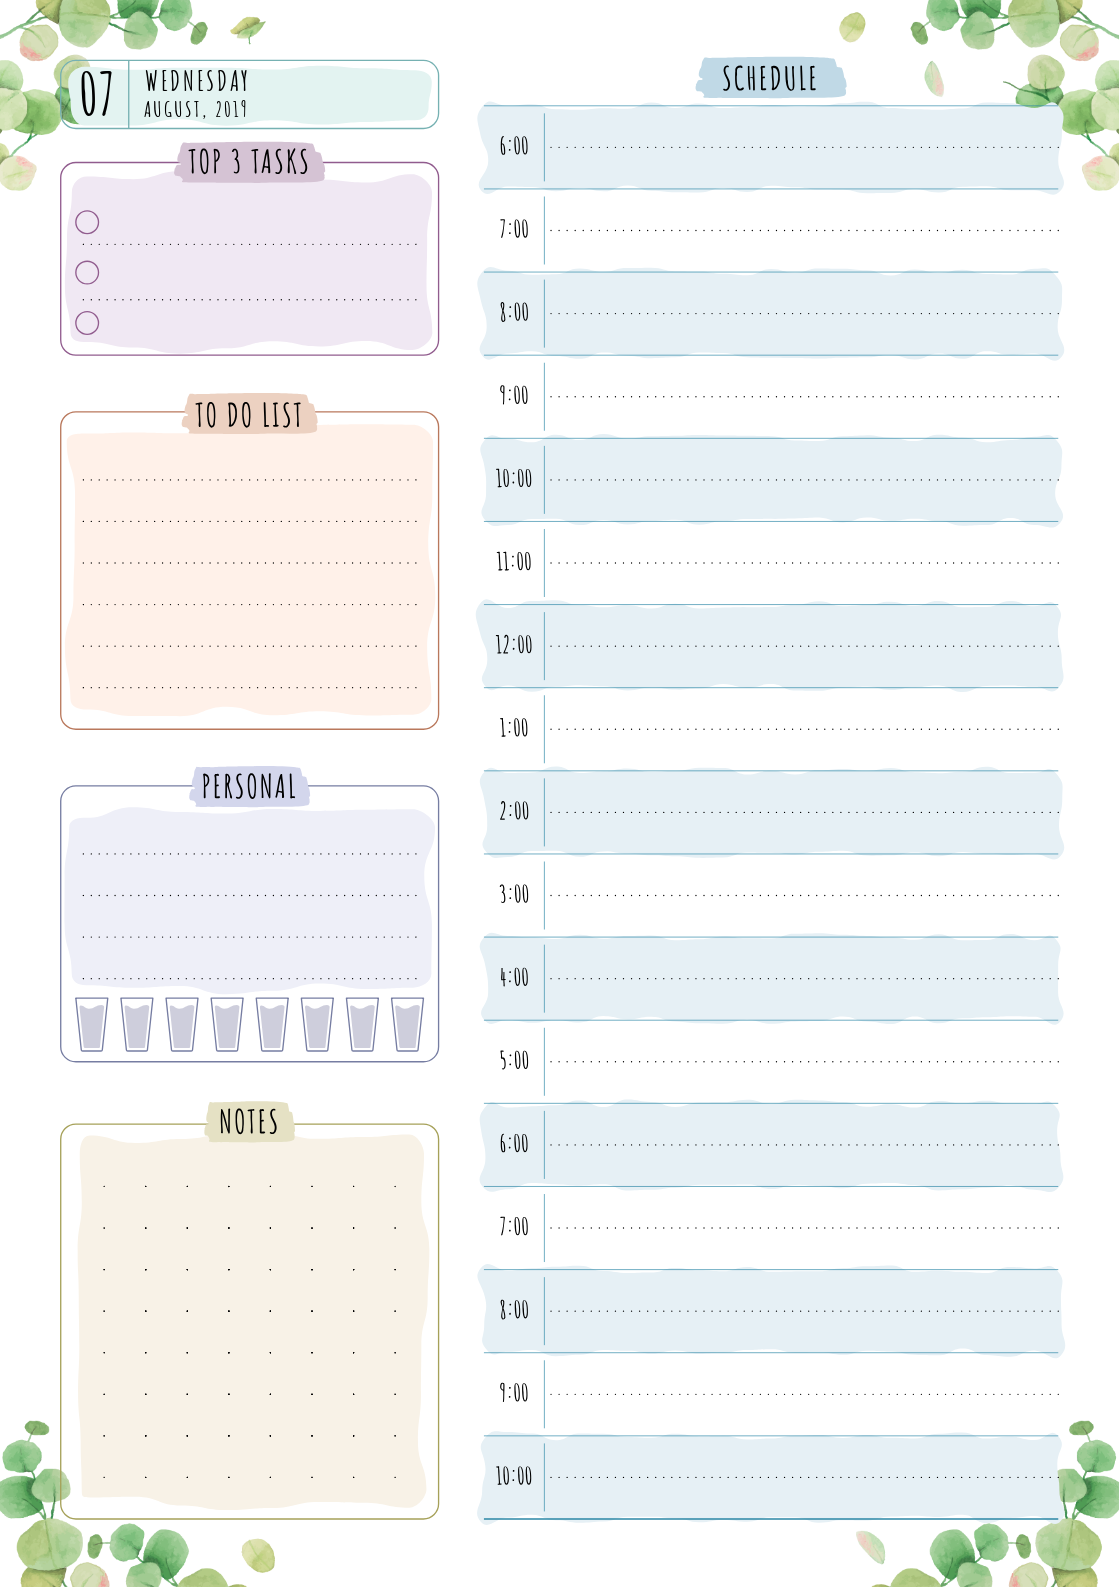 Download planner pdf oneamour app download